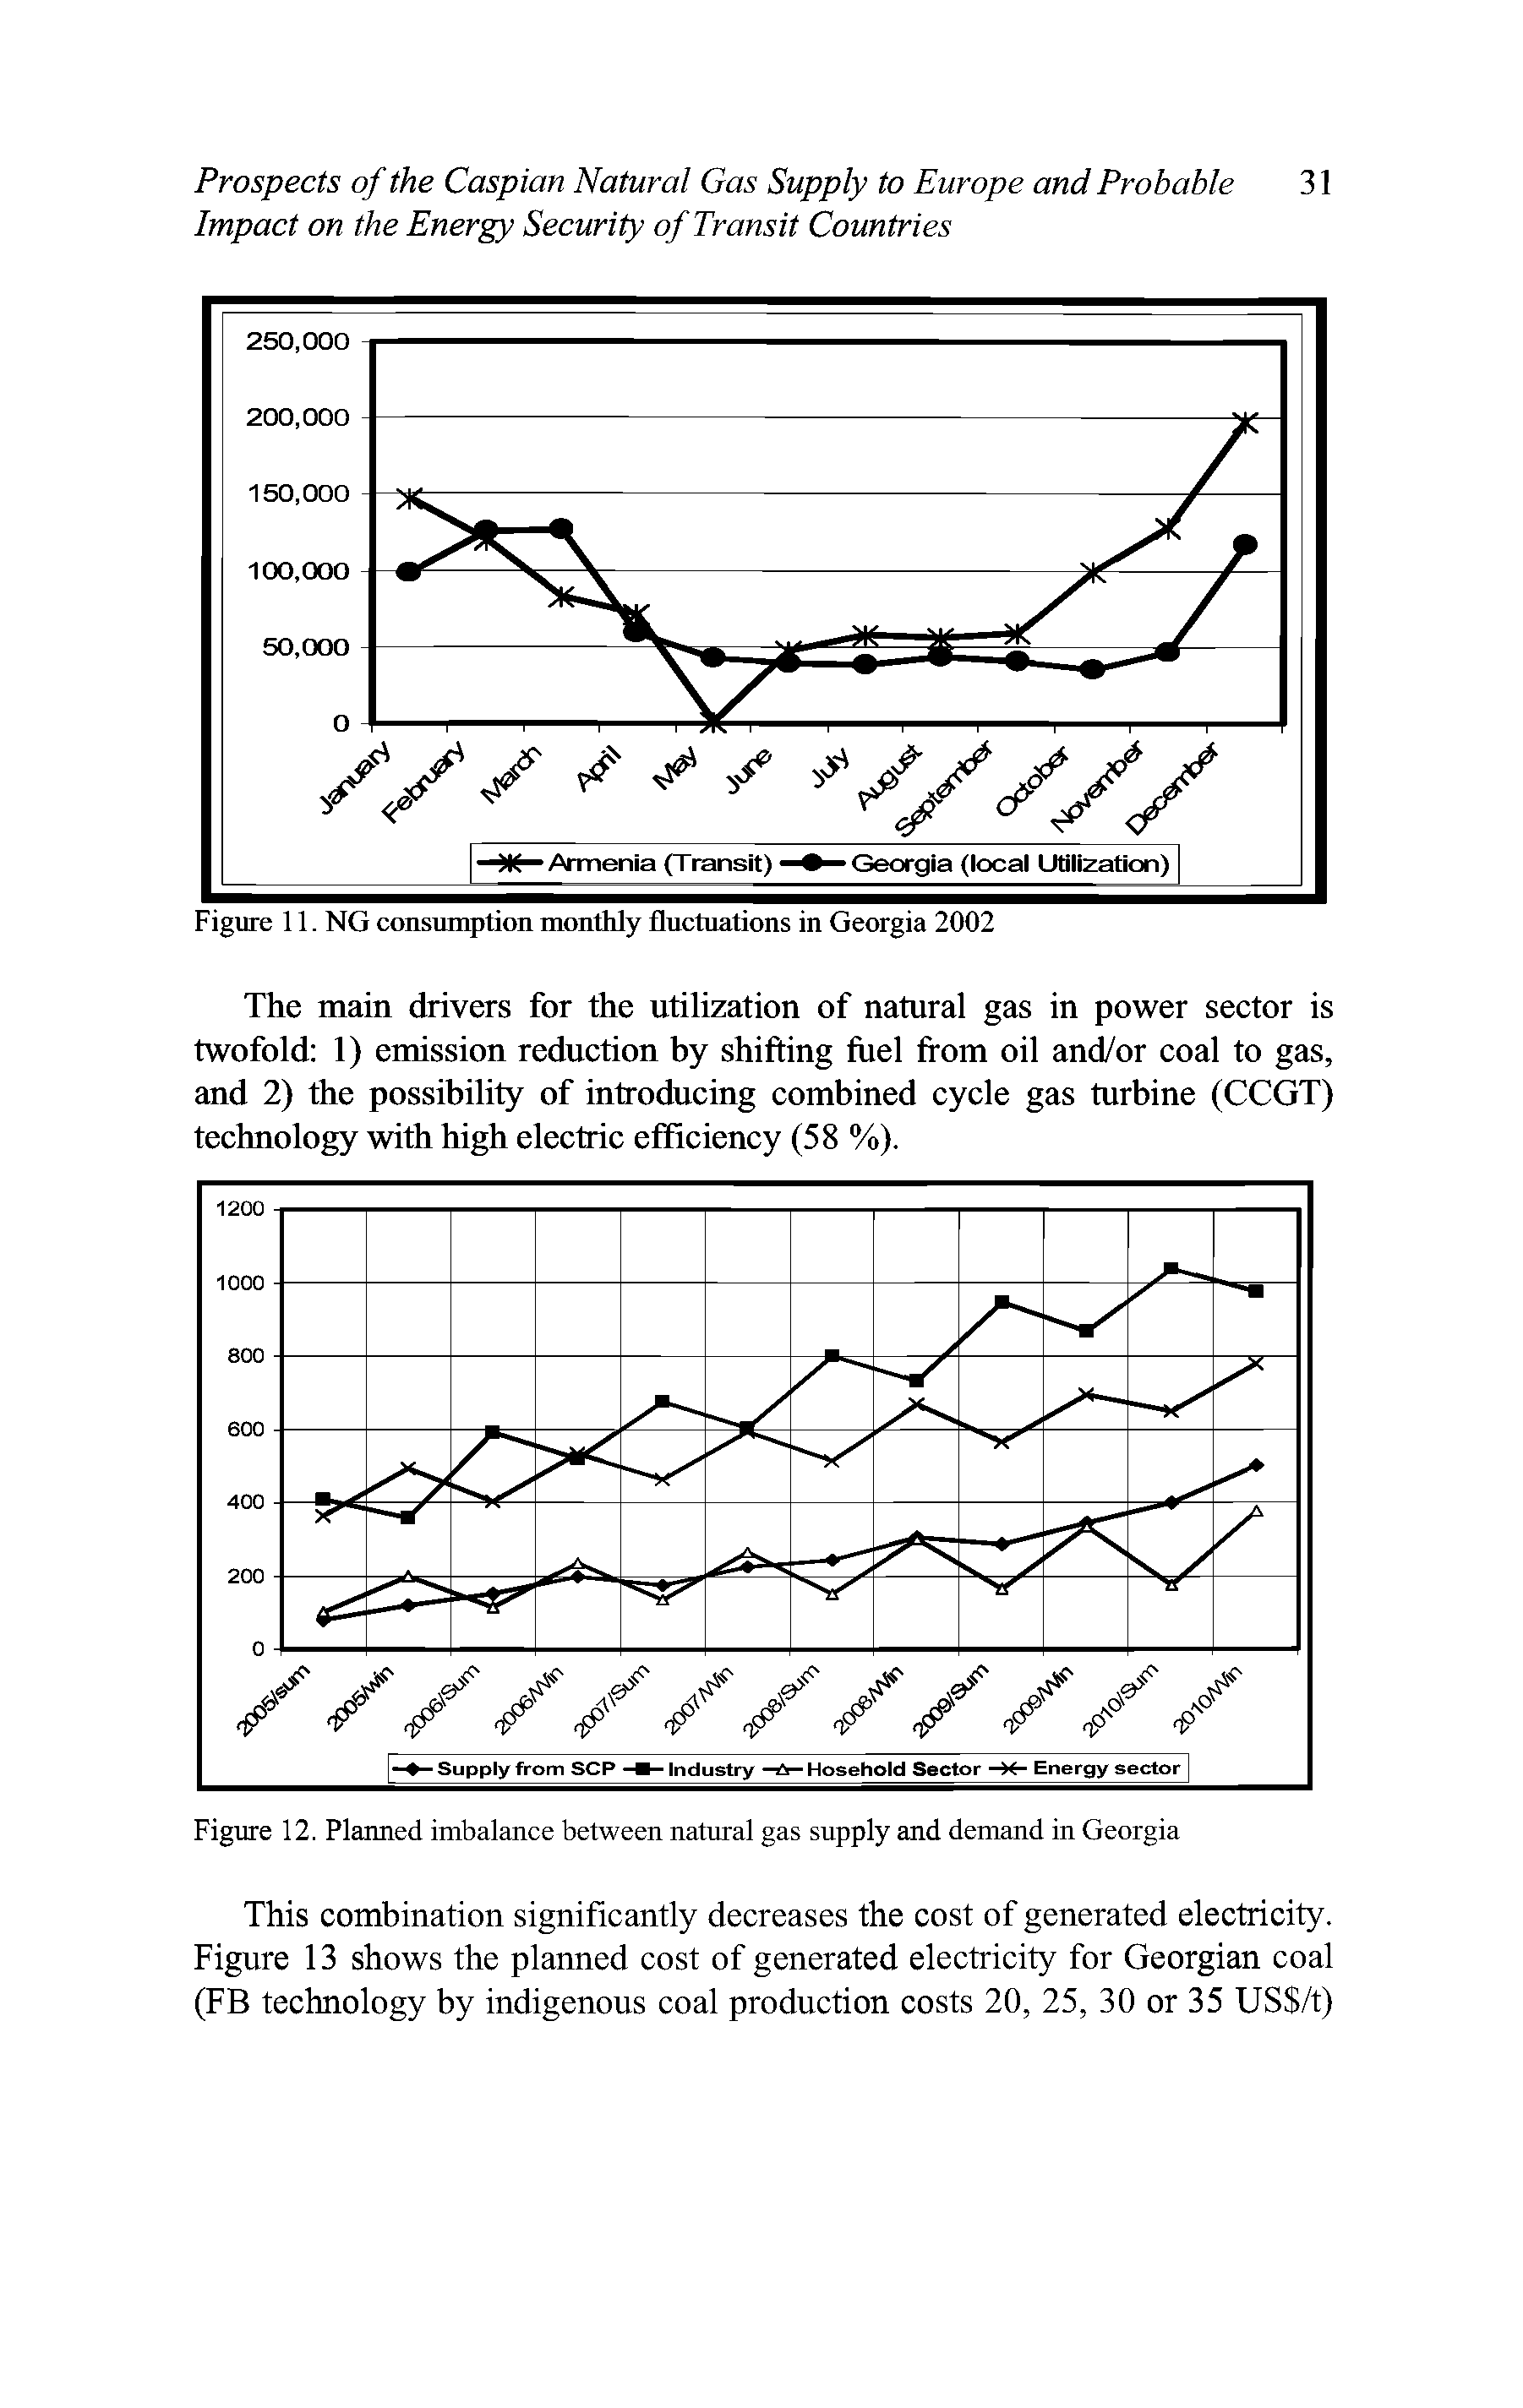 Figure 12. Planned imbalance between natural gas supply and demand in Georgia...